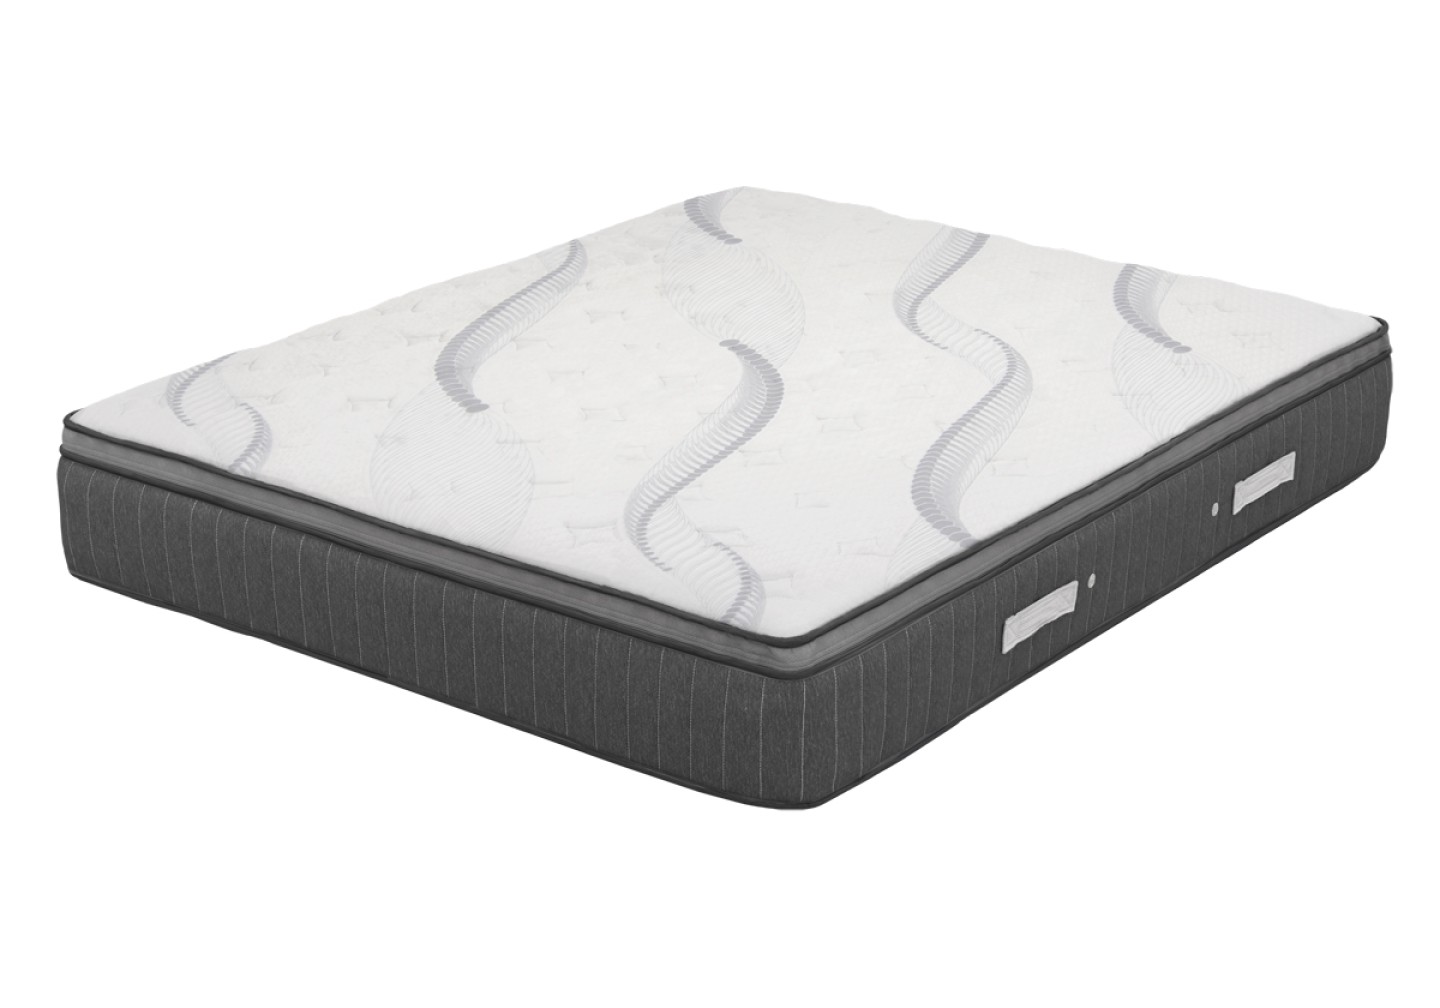 THE DELUXE MATTRESS by Elite Strom